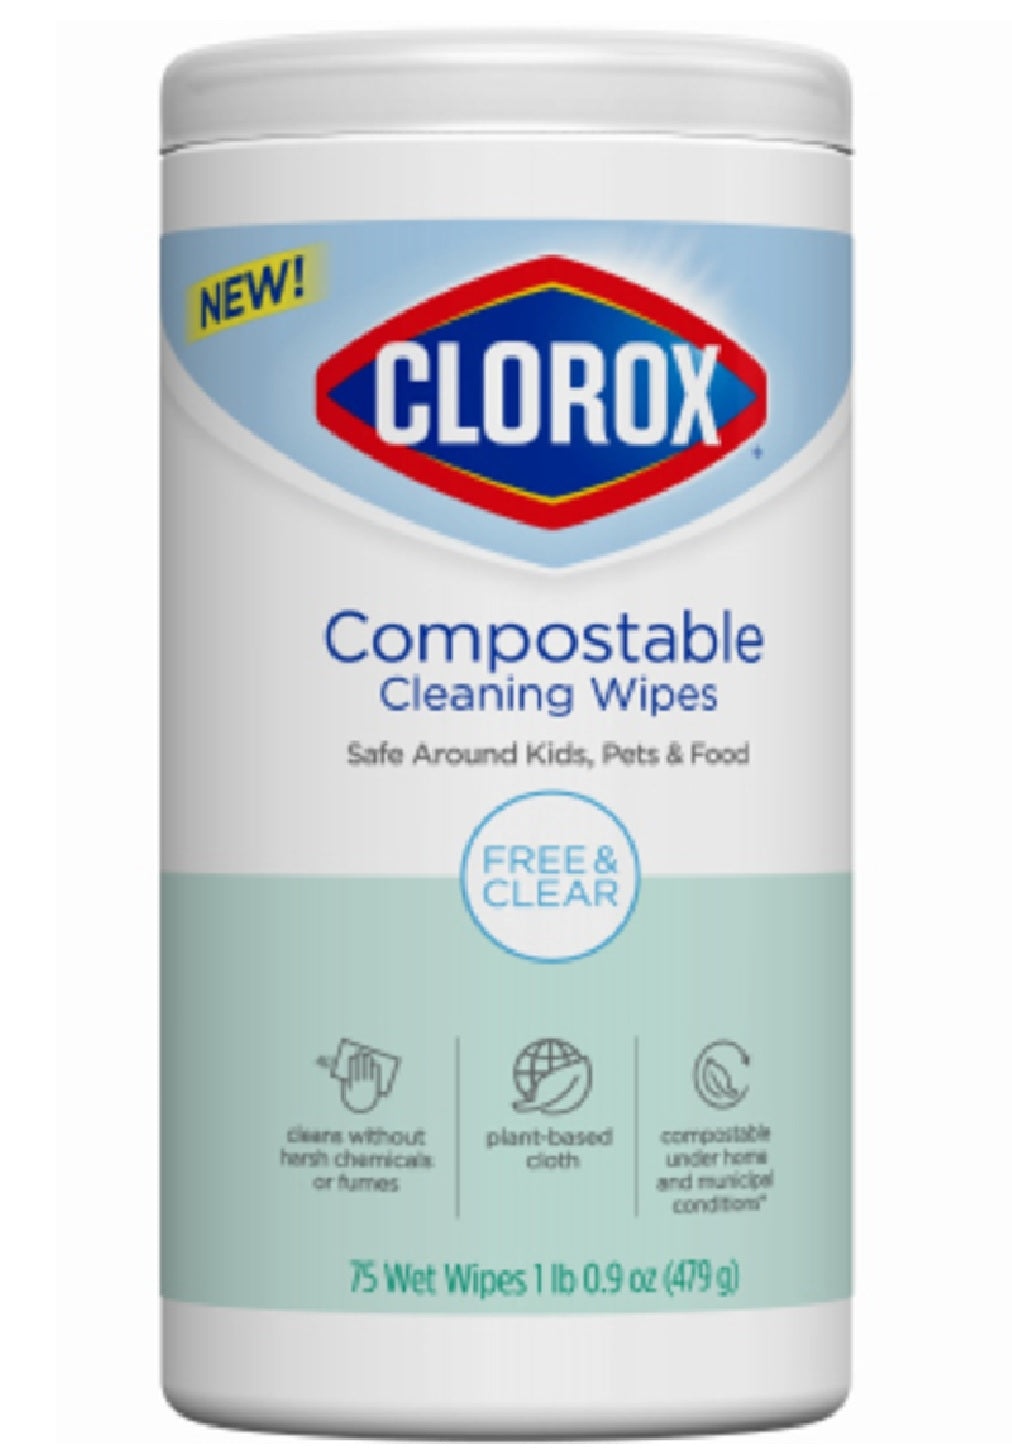 Clorox 32486 Compostable Cleaning Wipes Free & Clear, 75 Count